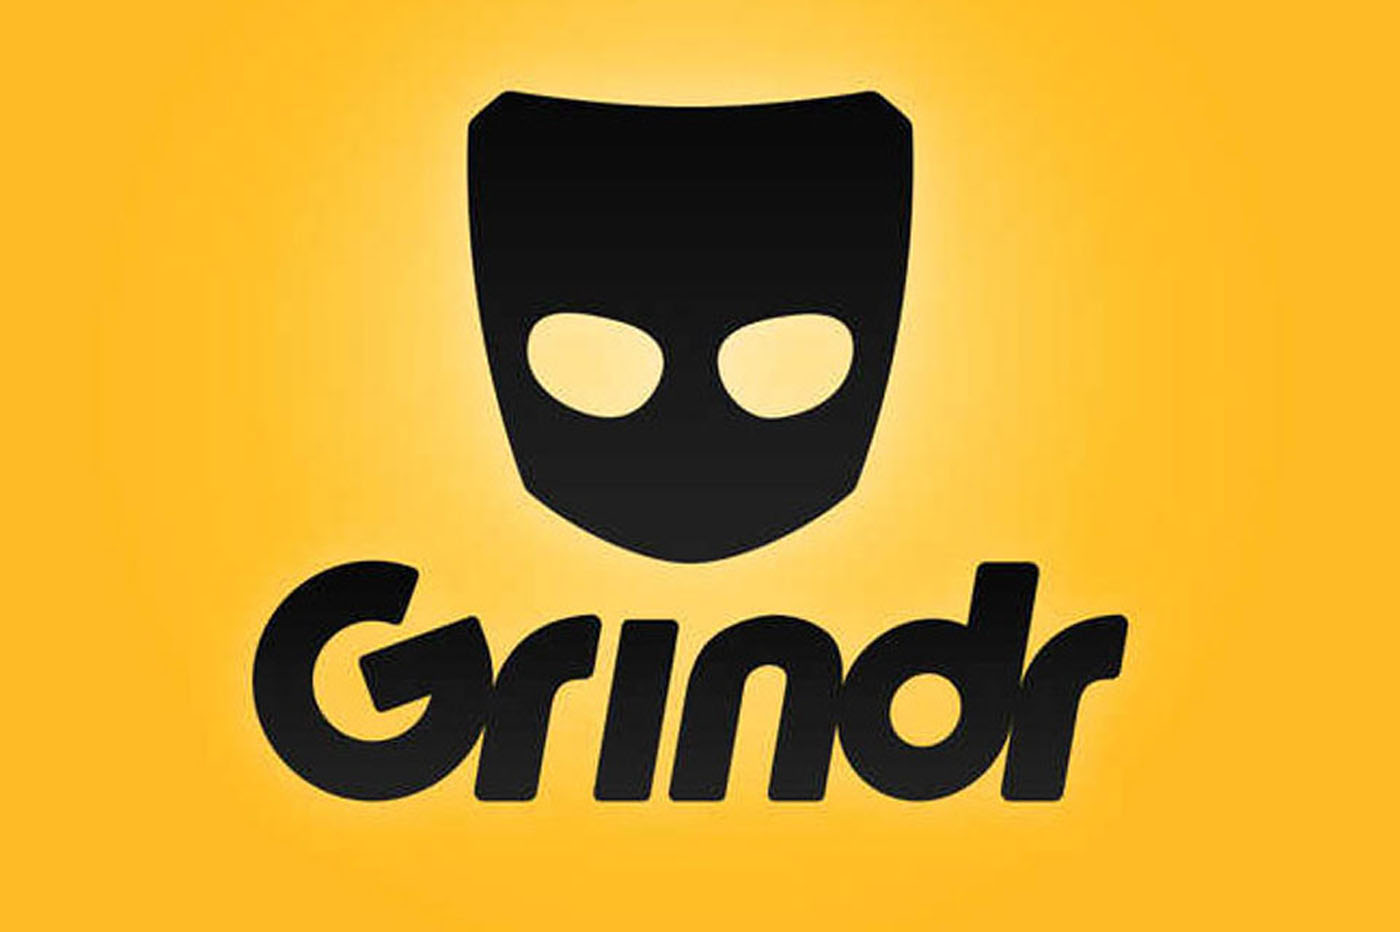 Grindr: A simple email is all it takes to hack into an account